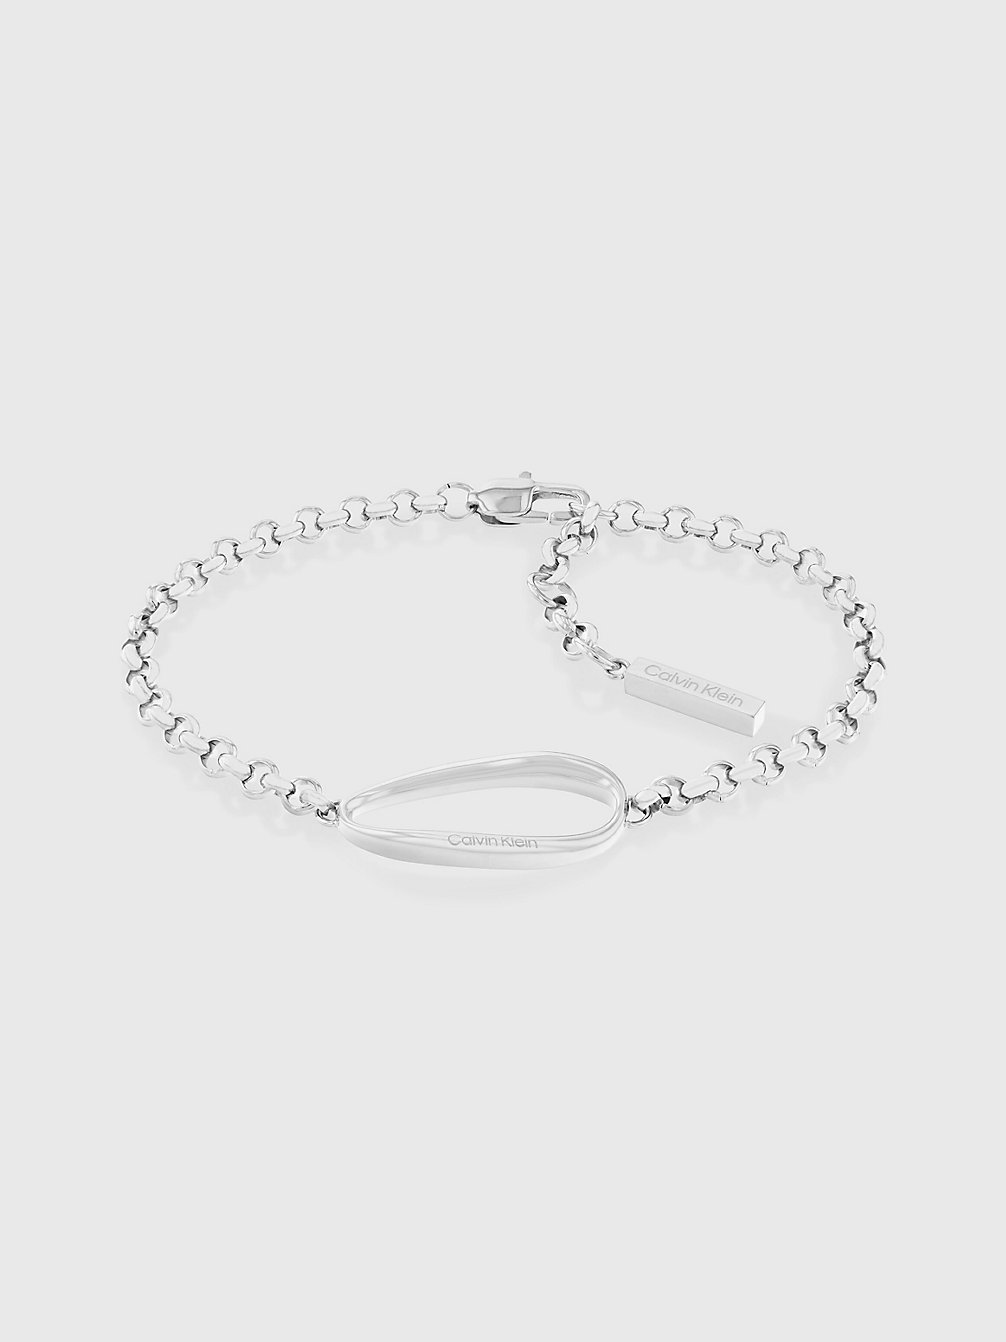 Bracciale - Playful Organic Shapes > SILVER > undefined donna > Calvin Klein